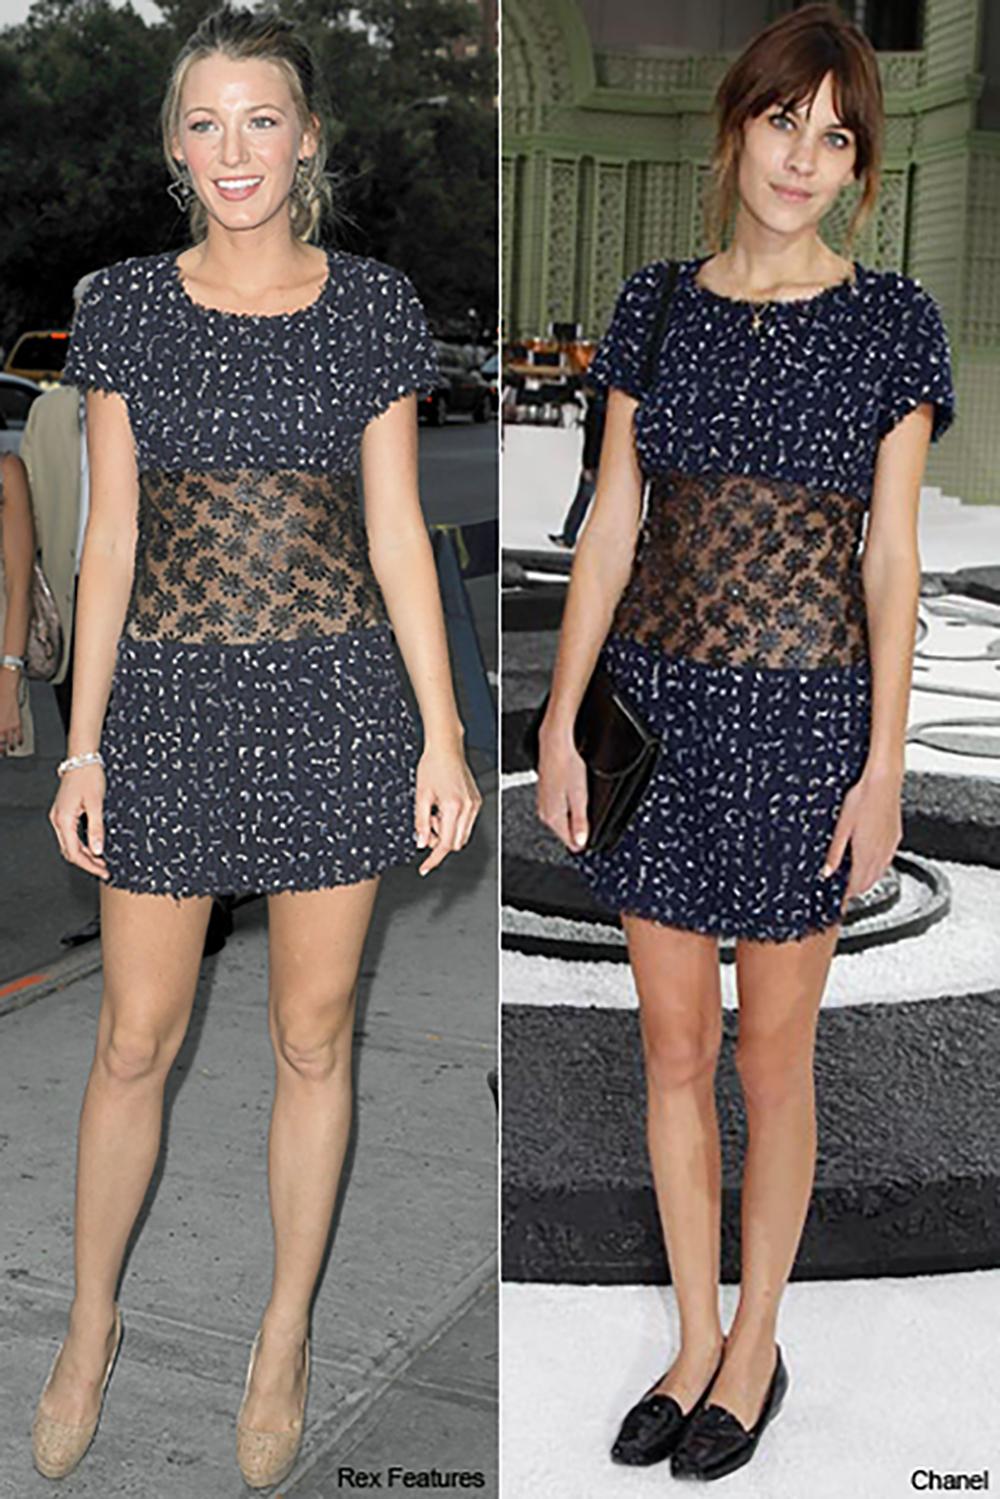 Famous Chanel navy tweed dress from SAINT-TROPEZ Cruise Collection by Karl Lagerfeld.
- as seen on many celebs incl. Black Lively and Alexa Chung
- CC logo charm at pocket
Size mark 34 FR. Condition is pristine.